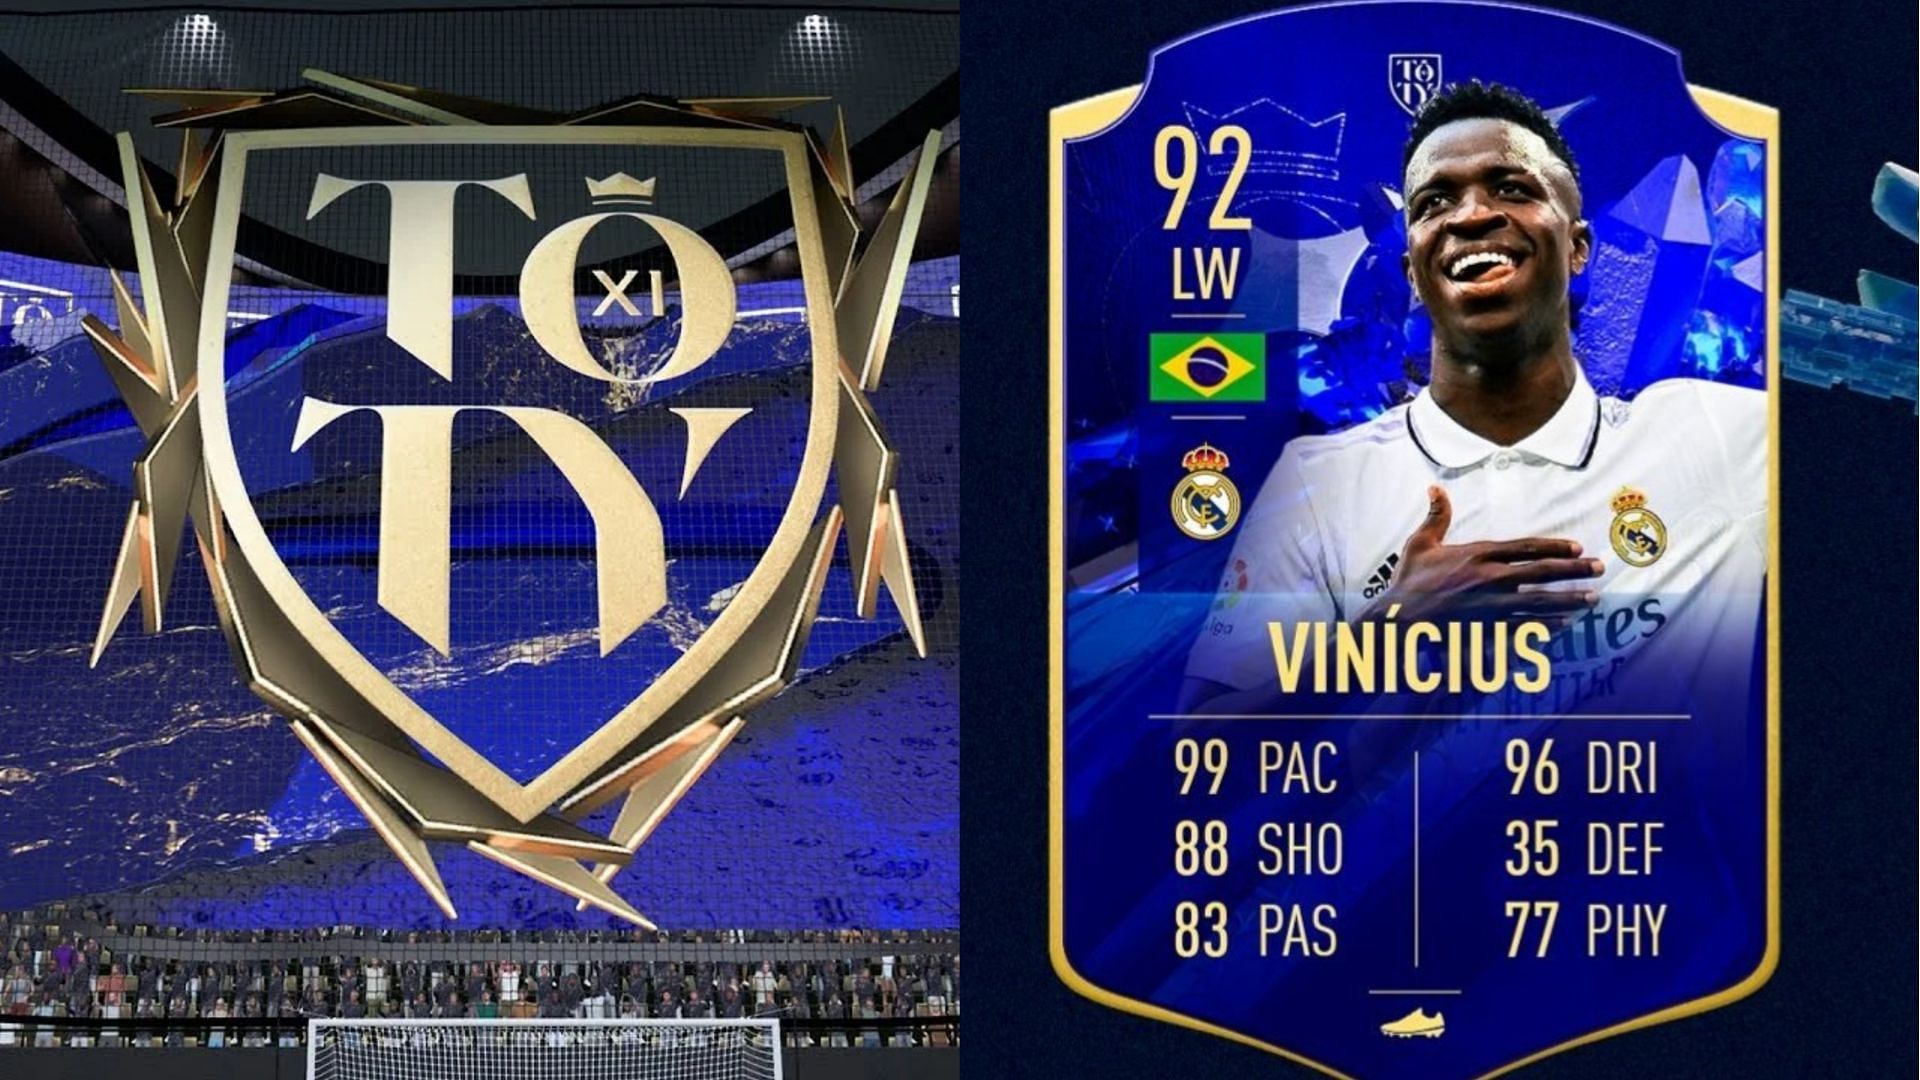 A special card for Vinicius has been leaked (Images via EA Sports, Twitter/FTR)